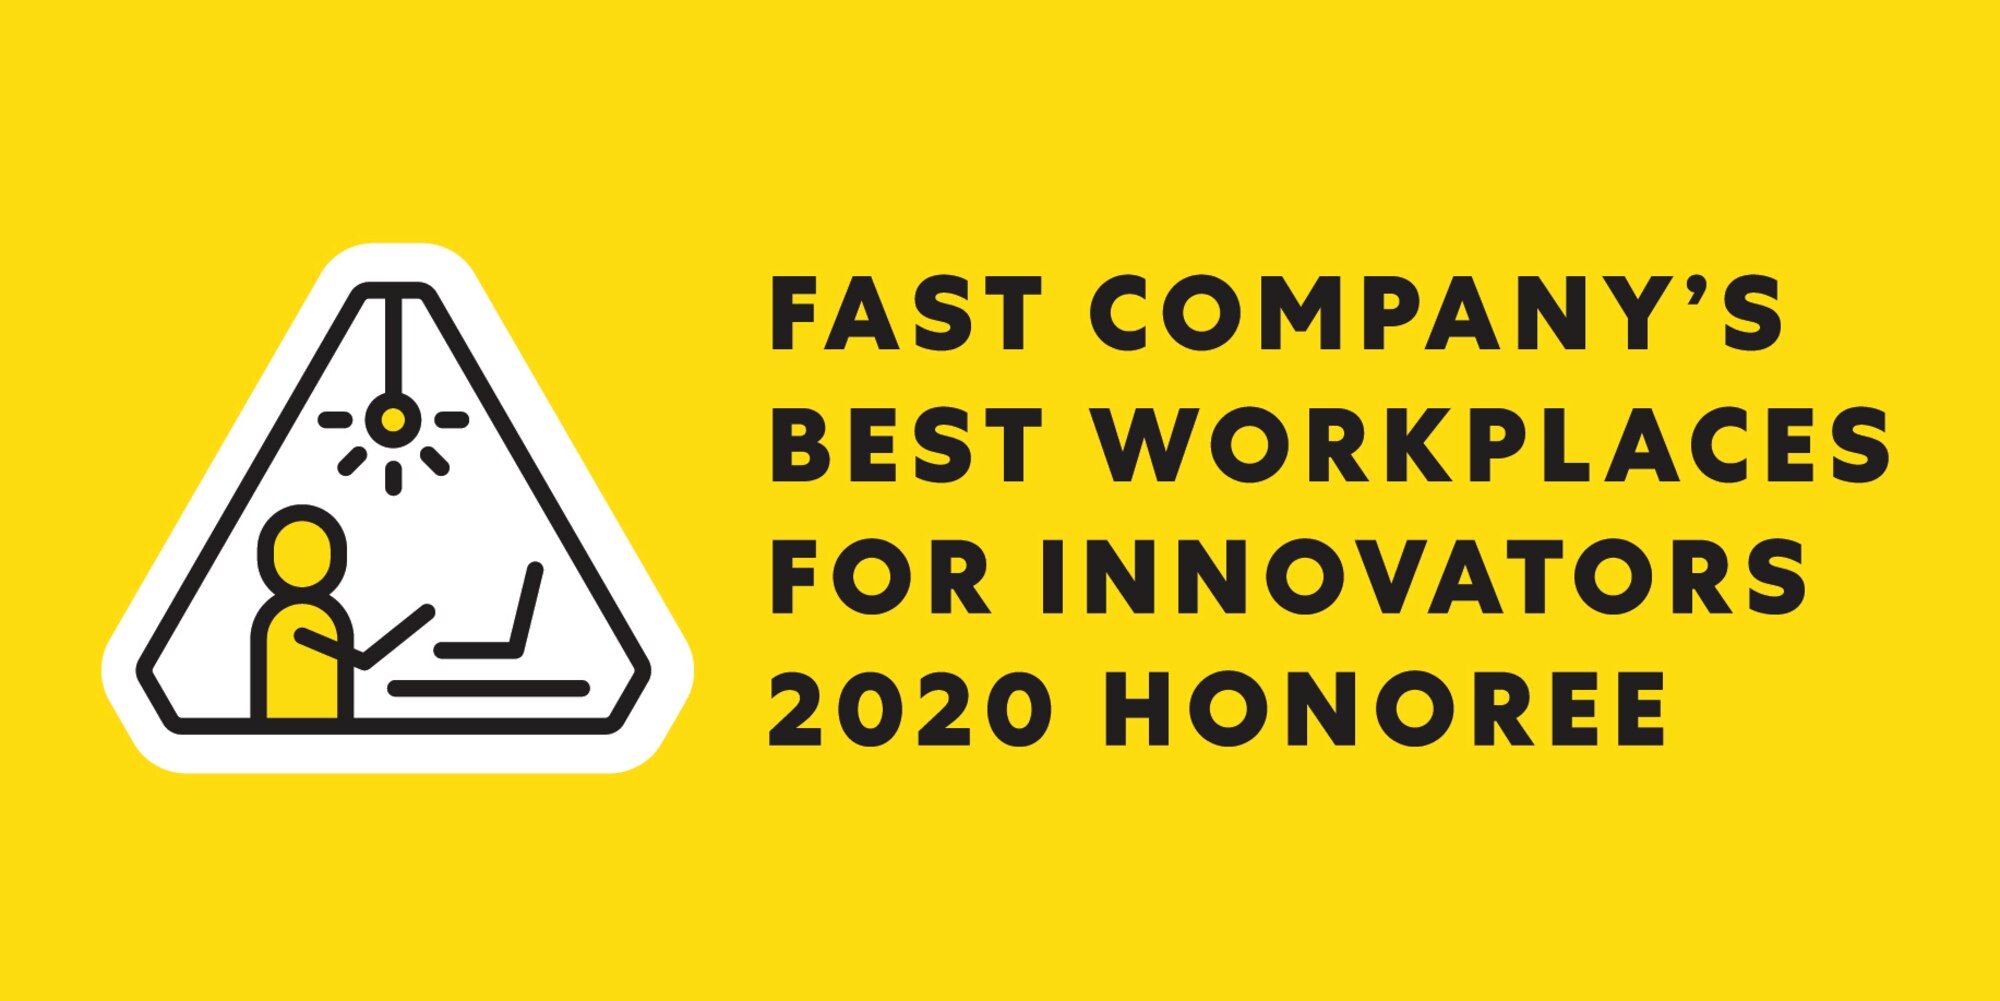 AFWERX came in at number 16 on Fast Company’s Best Workplaces for Innovators 2020 list. Through AFWERX, progress has been made through a variety of initiatives including AFWERX Challenge, Air Force Ventures and the Air Force Small Business Innovation Research and Small Business Technology Transfer Open Topic process, grassroots Spark Cells, and culture change campaigns. (Courtesy photo)